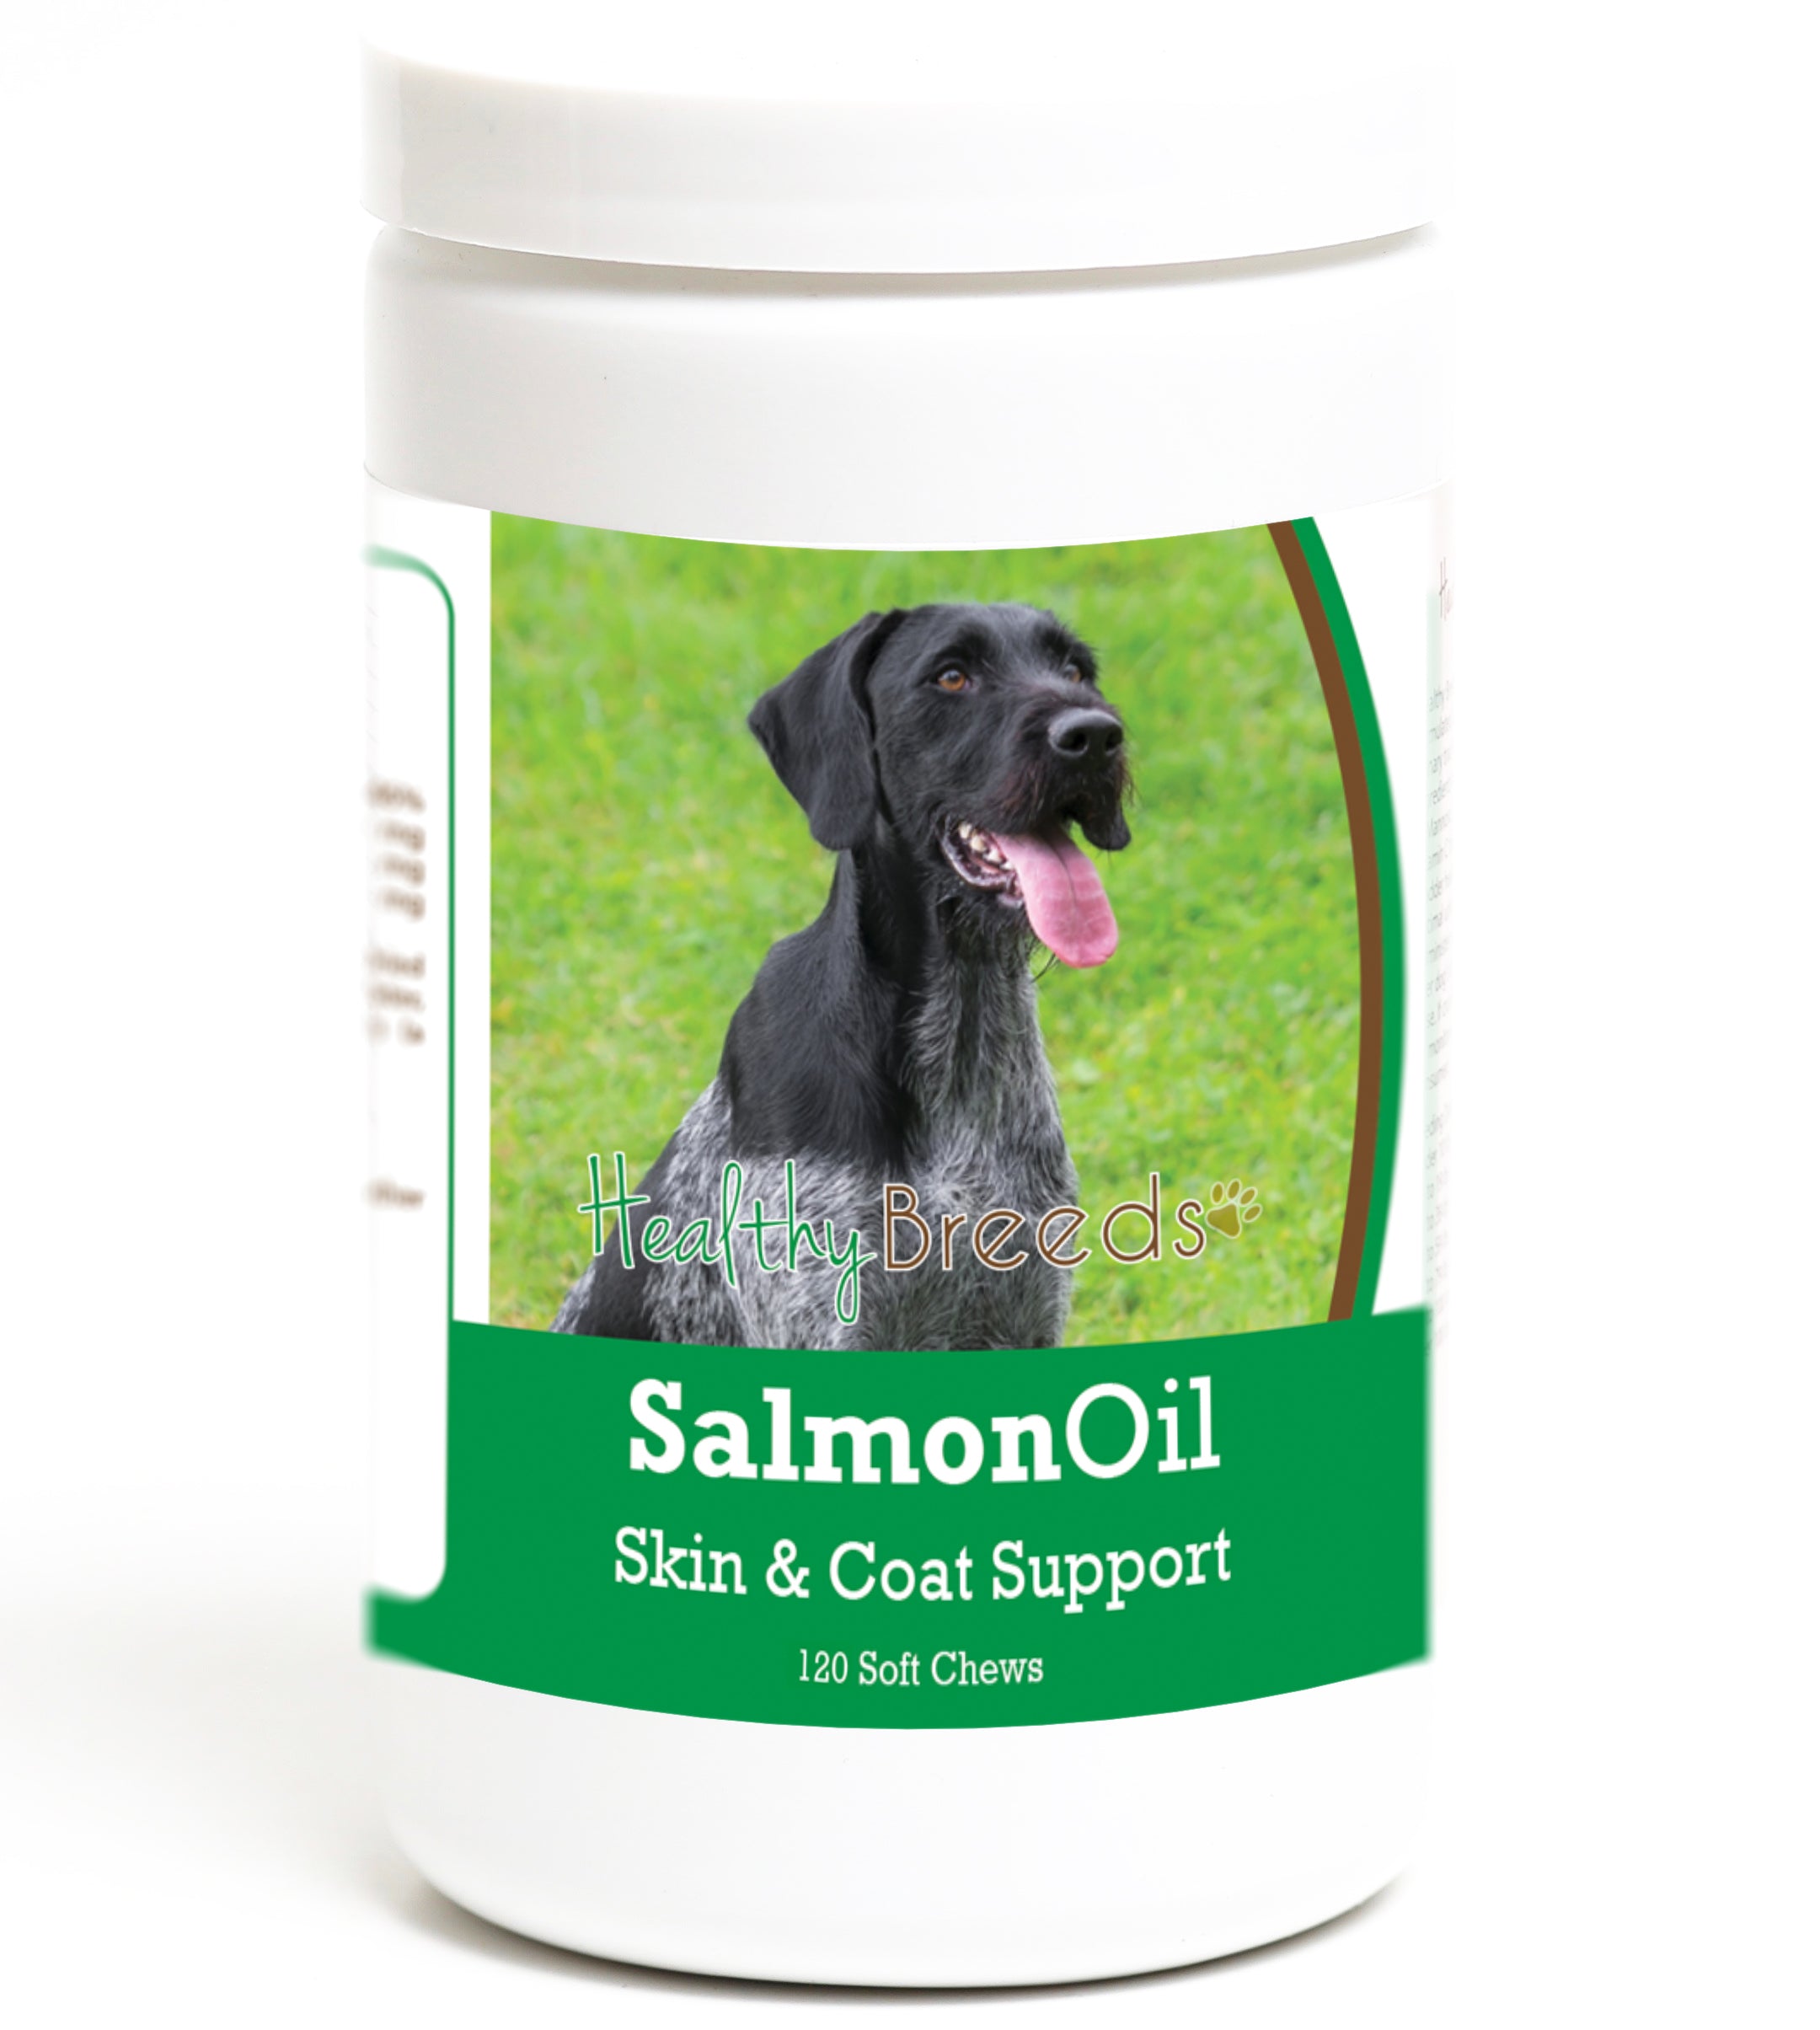 German Wirehaired Pointer Salmon Oil Soft Chews 120 Count